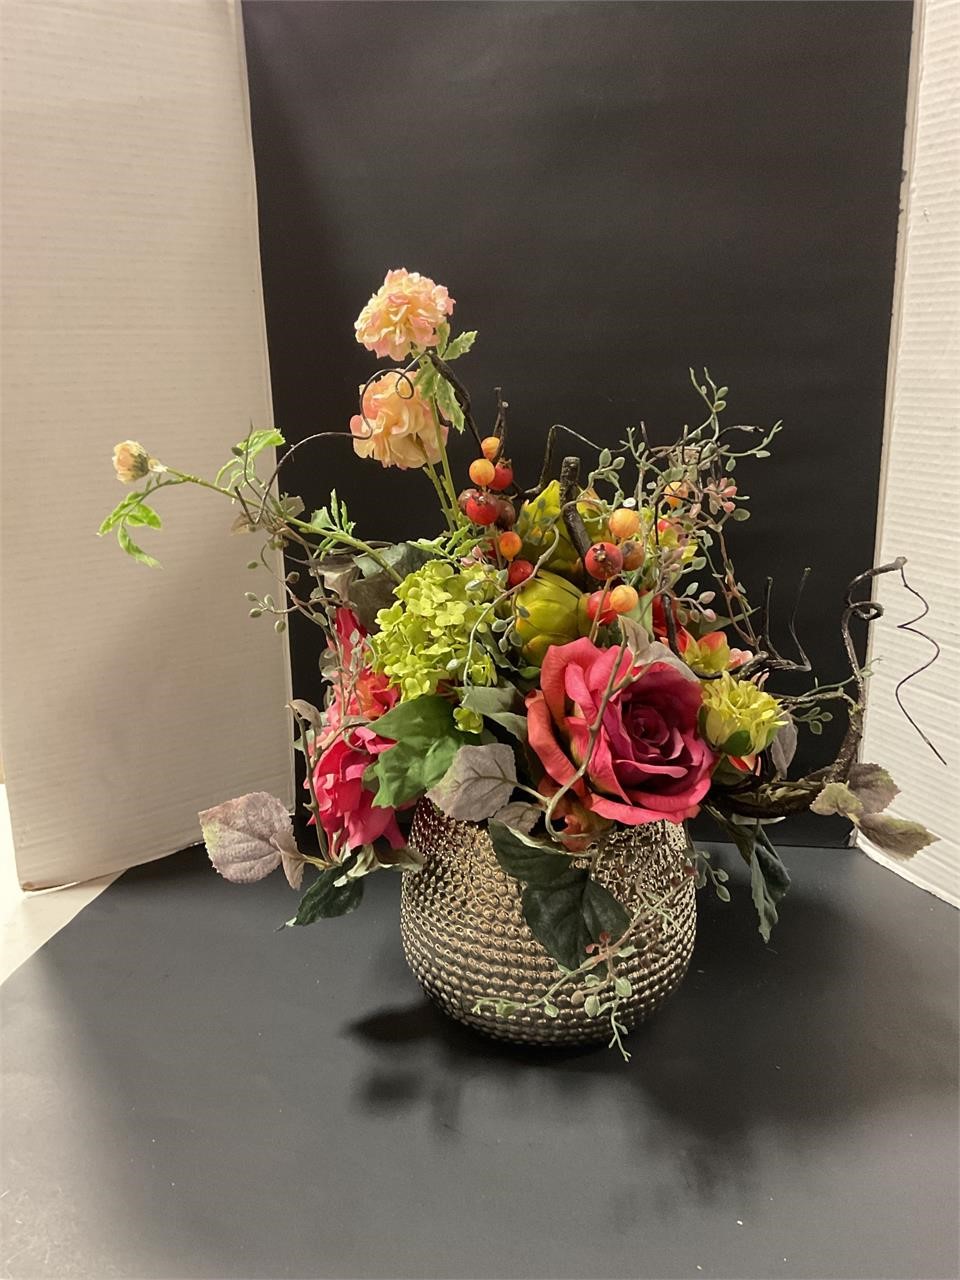 Decorative vase and artificial flowers,18” tall